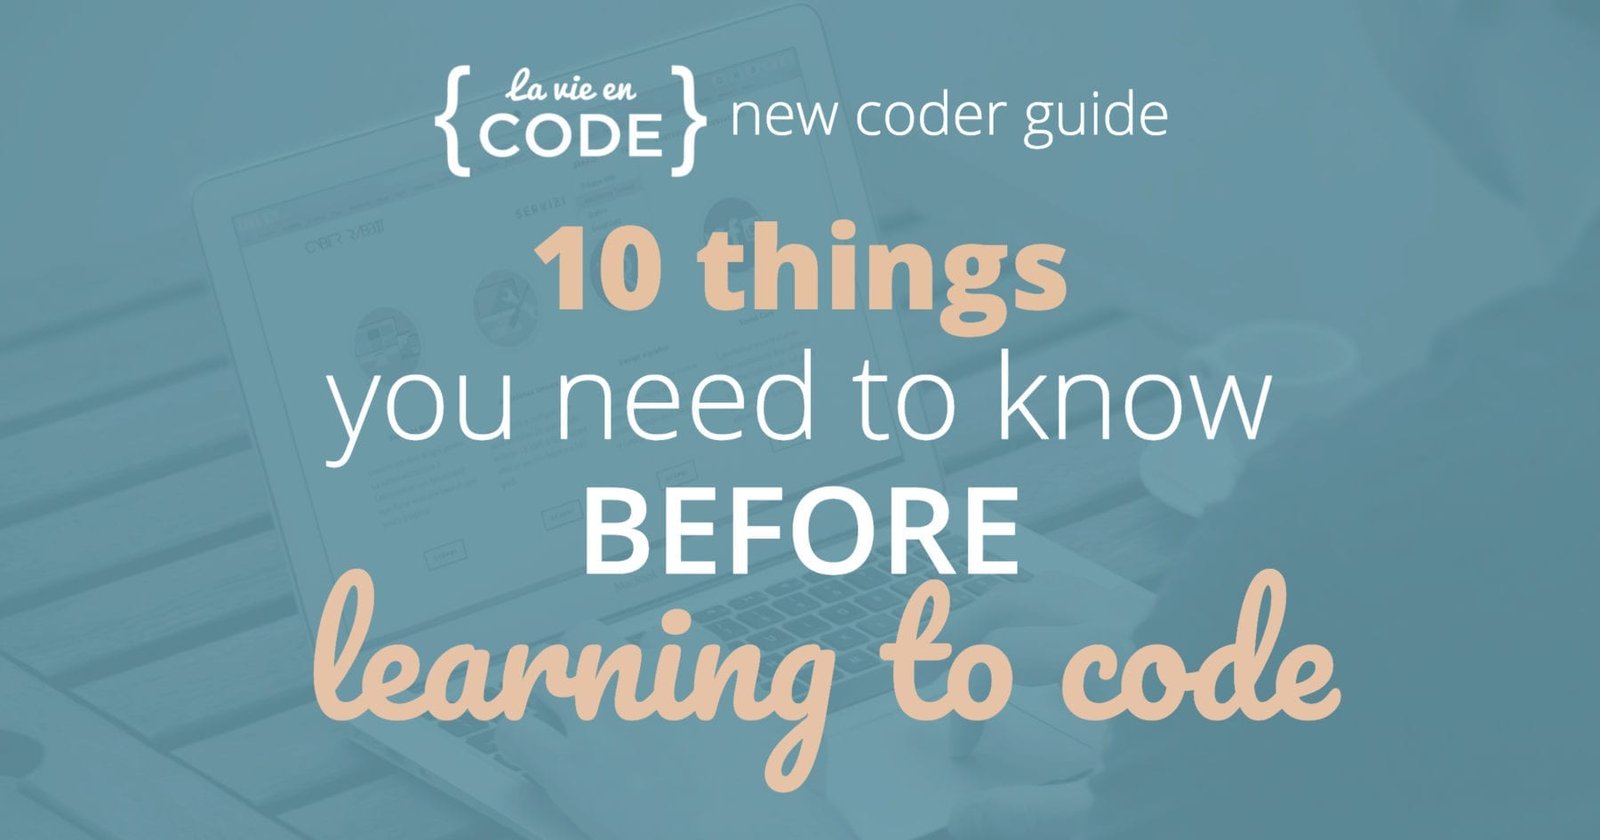 Image reading "La Vie en Code New Coder Guide: 10 Things You Need to Know BEFORE Learning to Code"